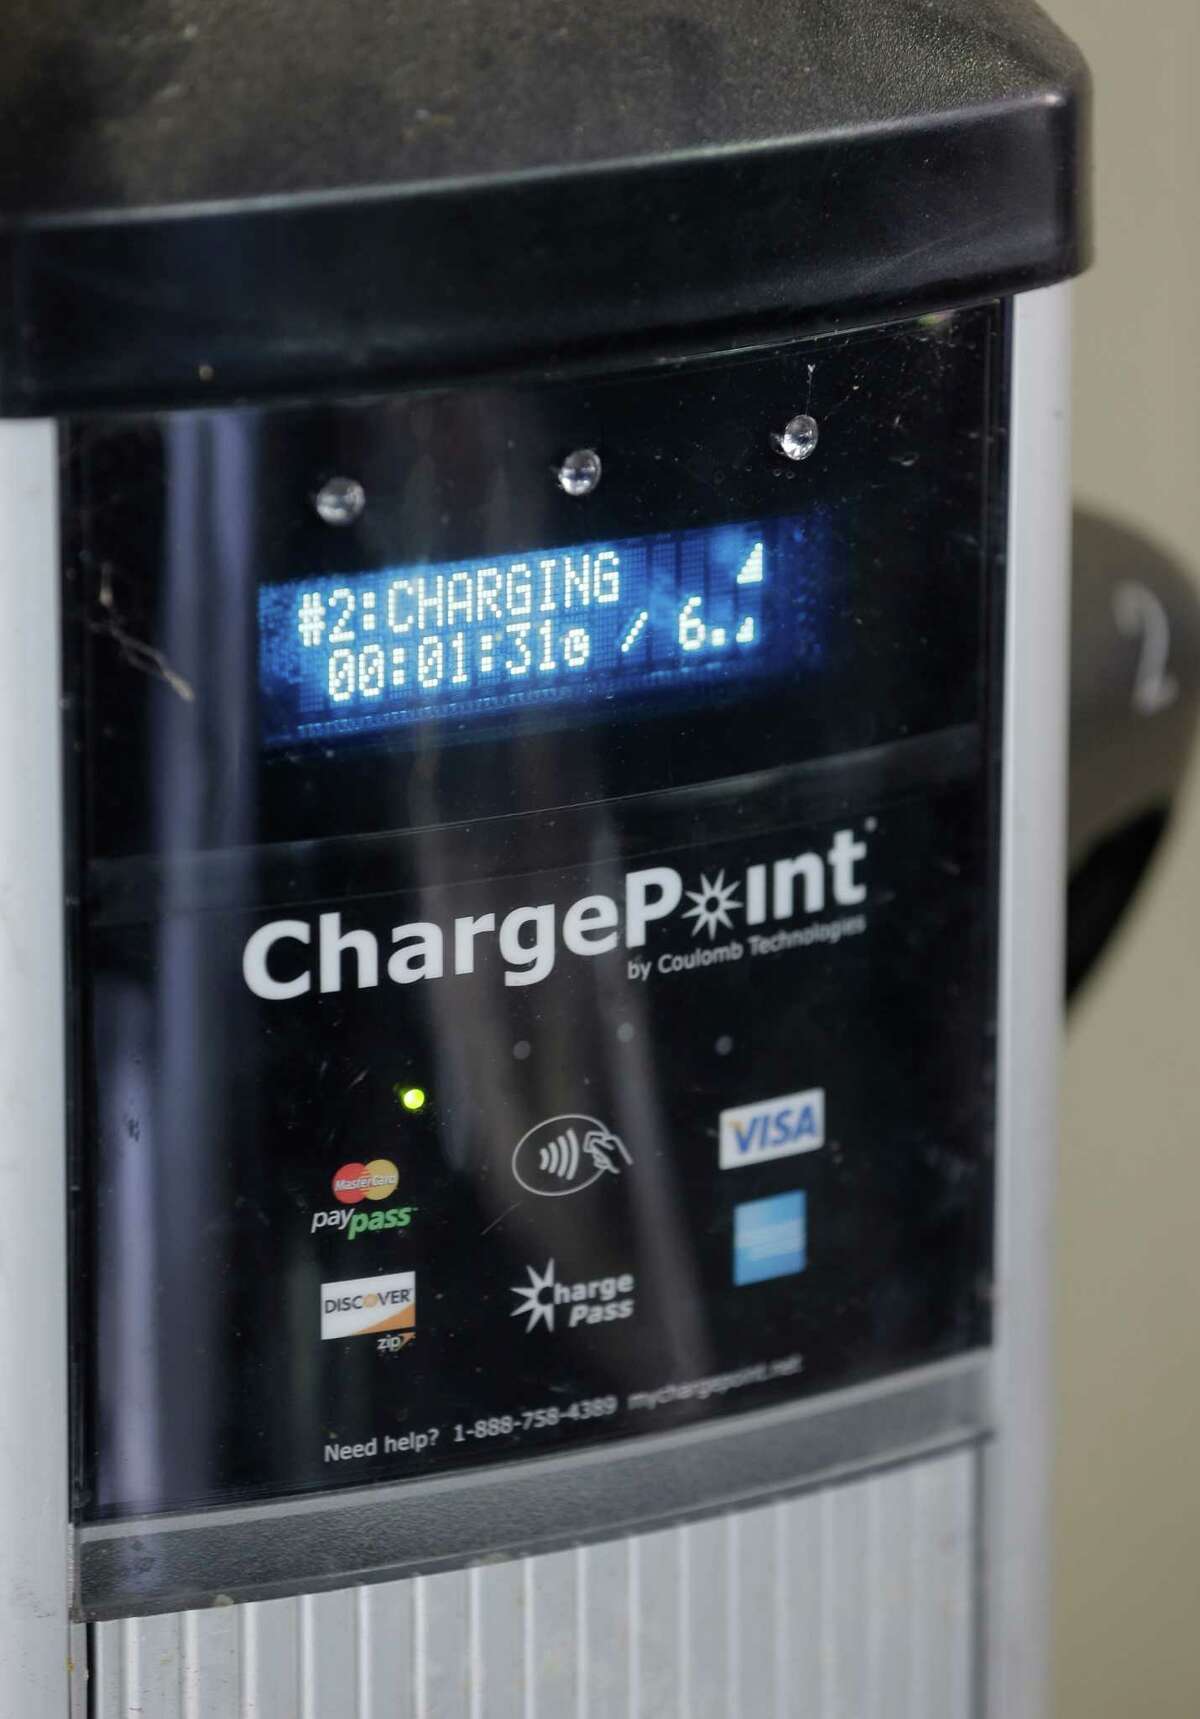 This Sept. 4, 2013 photo shows the screen of a charge point for a new electric rental car in Orlando, Fla. On Thursday, Sept. 5, Orlando will be home to a first-of-its-kind electric rental car initiative where hotel partners will valet park the electric rental for free and charge it for you. Orlando already has more than 300 stations in the area. (AP Photo/John Raoux)